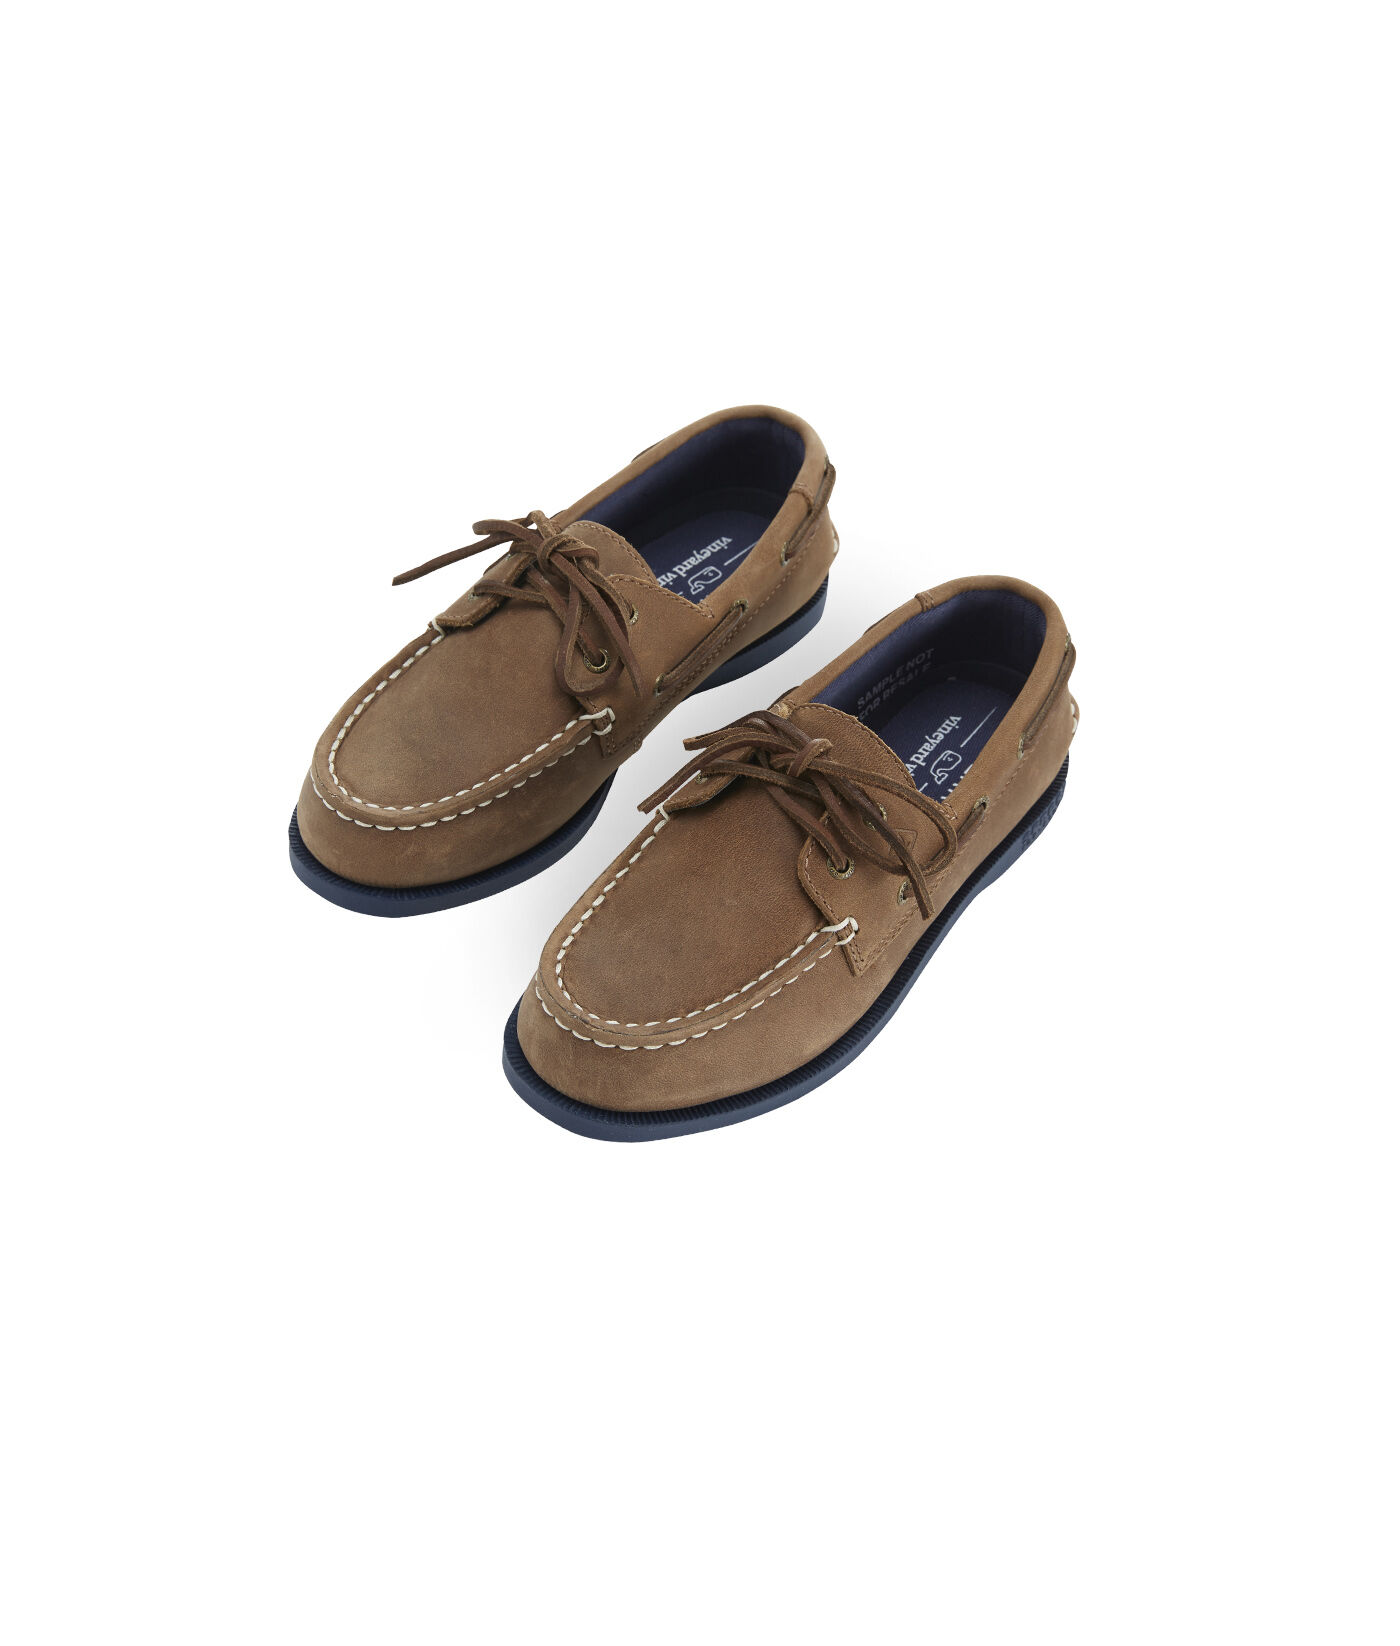 kids sperry boat shoes